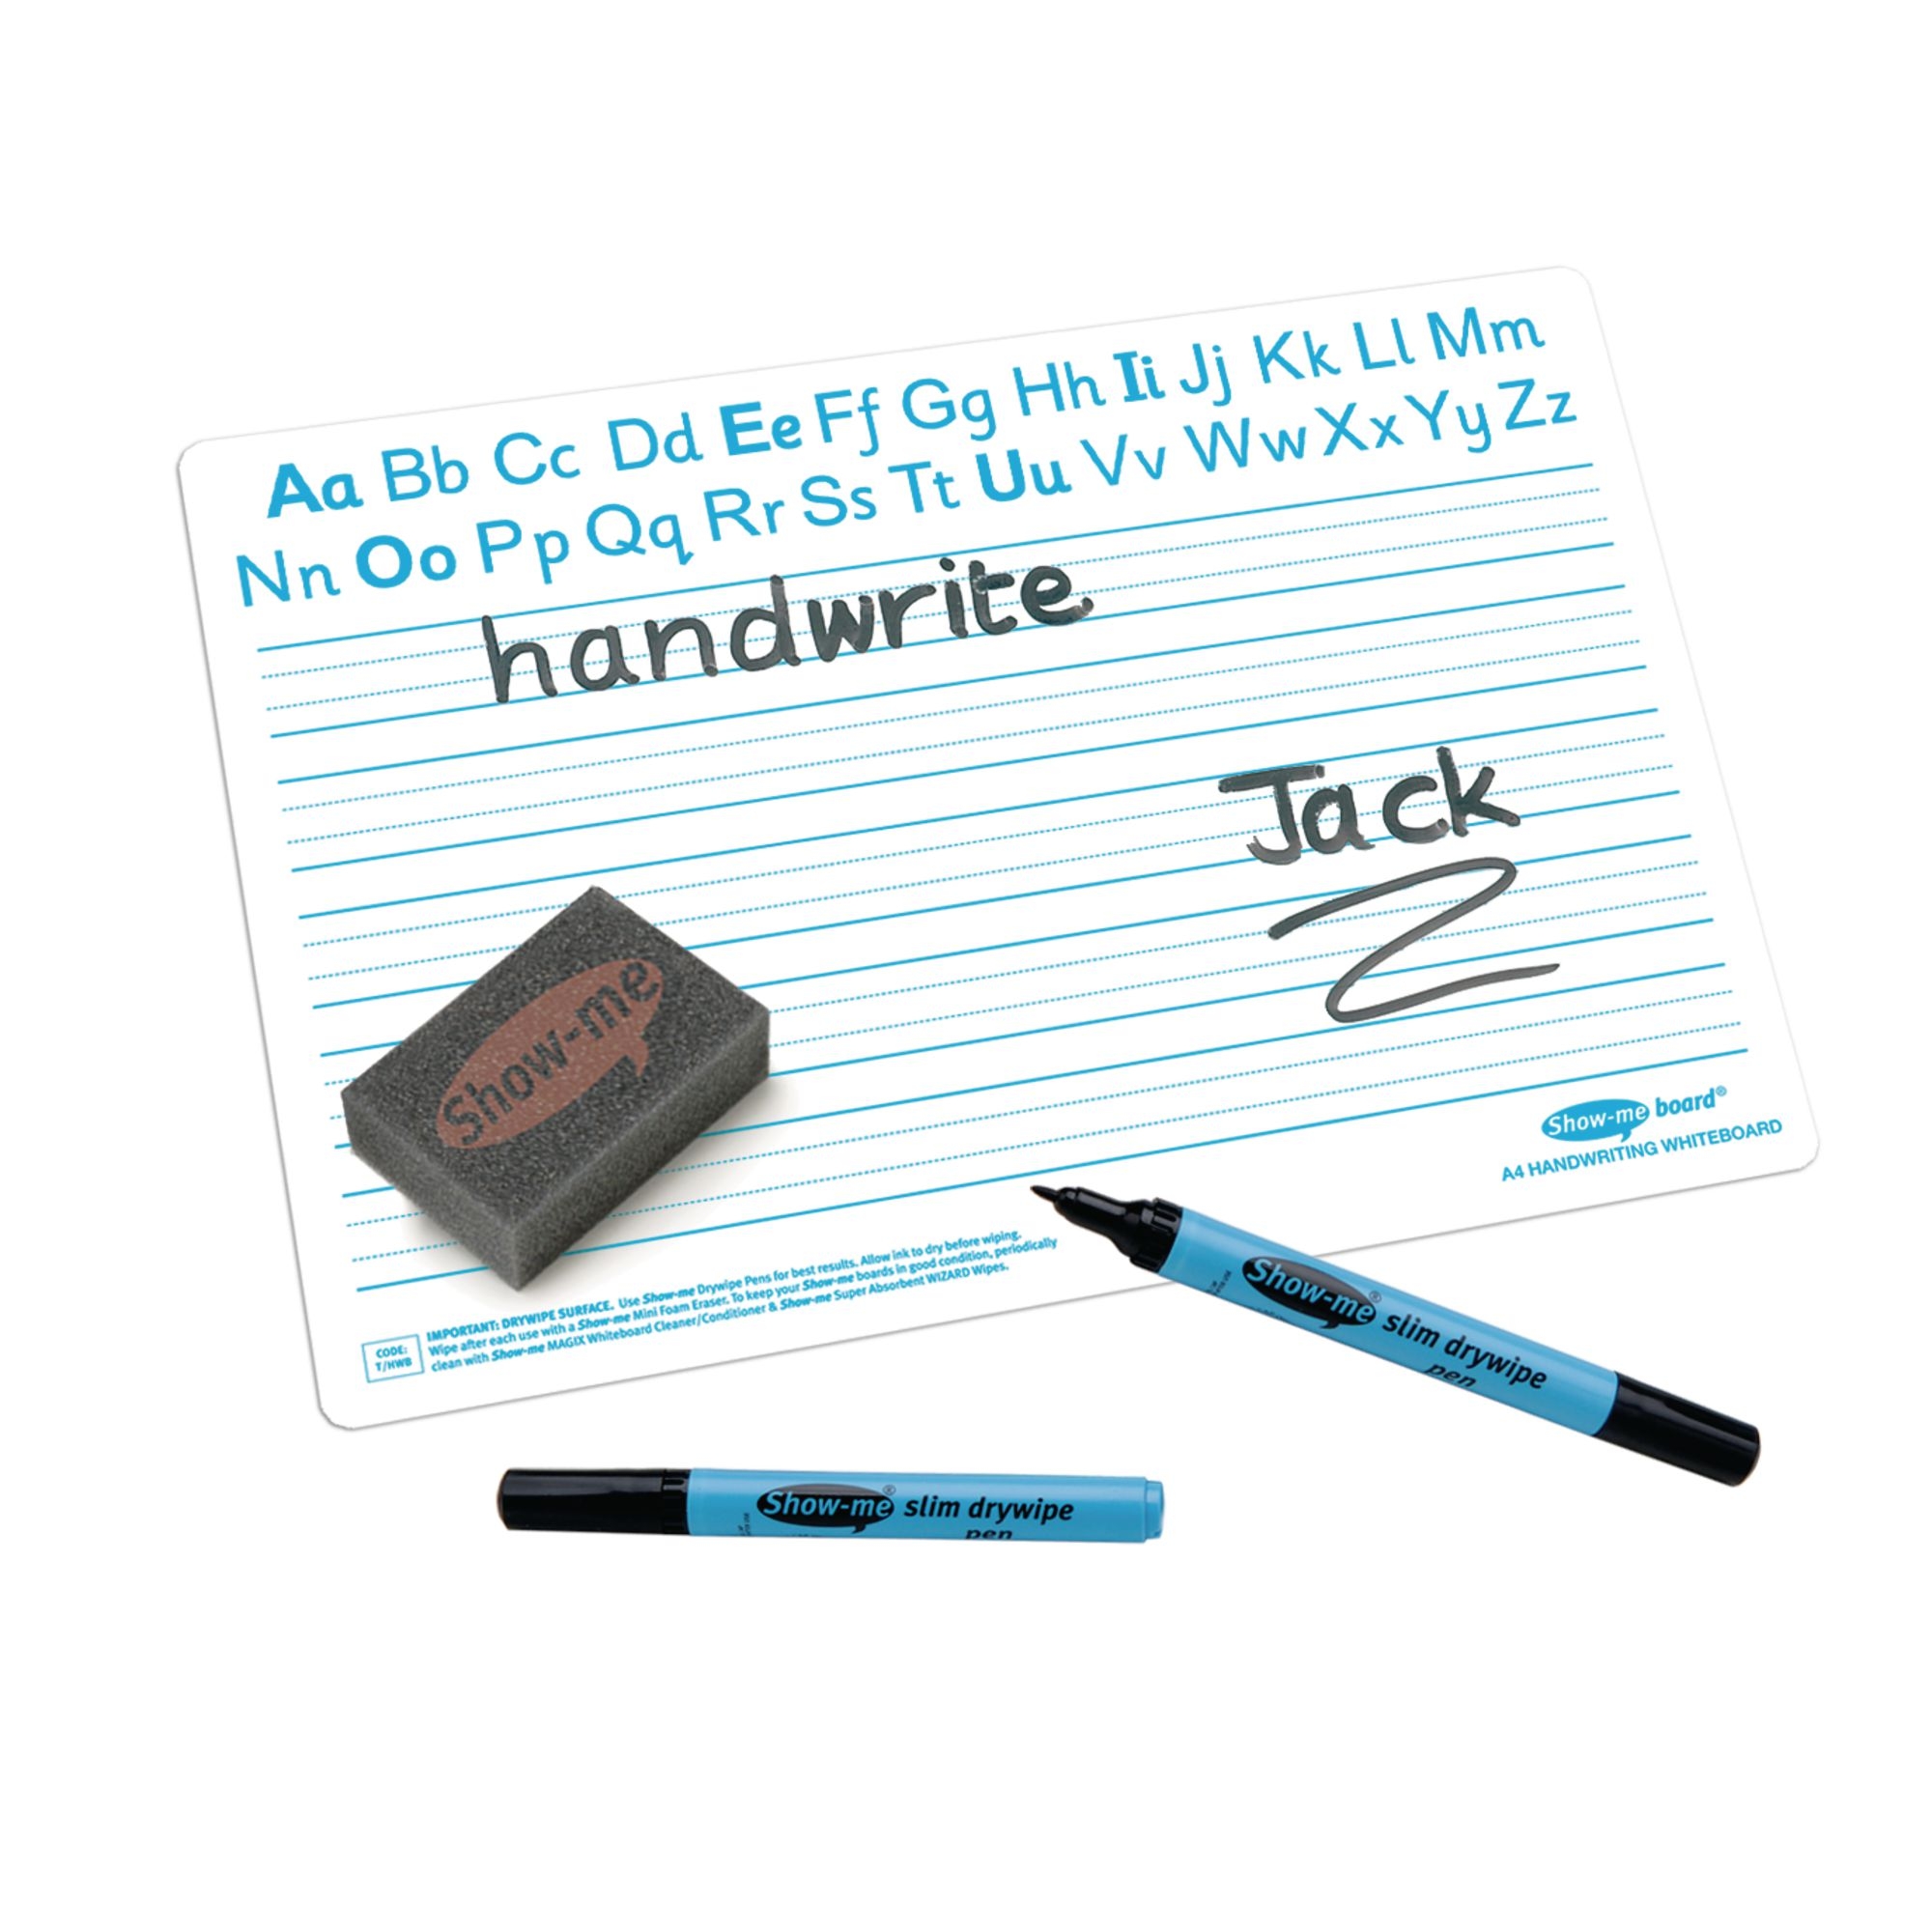 A4 Handwriting Whiteboards - HANDWRITING Boards, Pens & Erasers